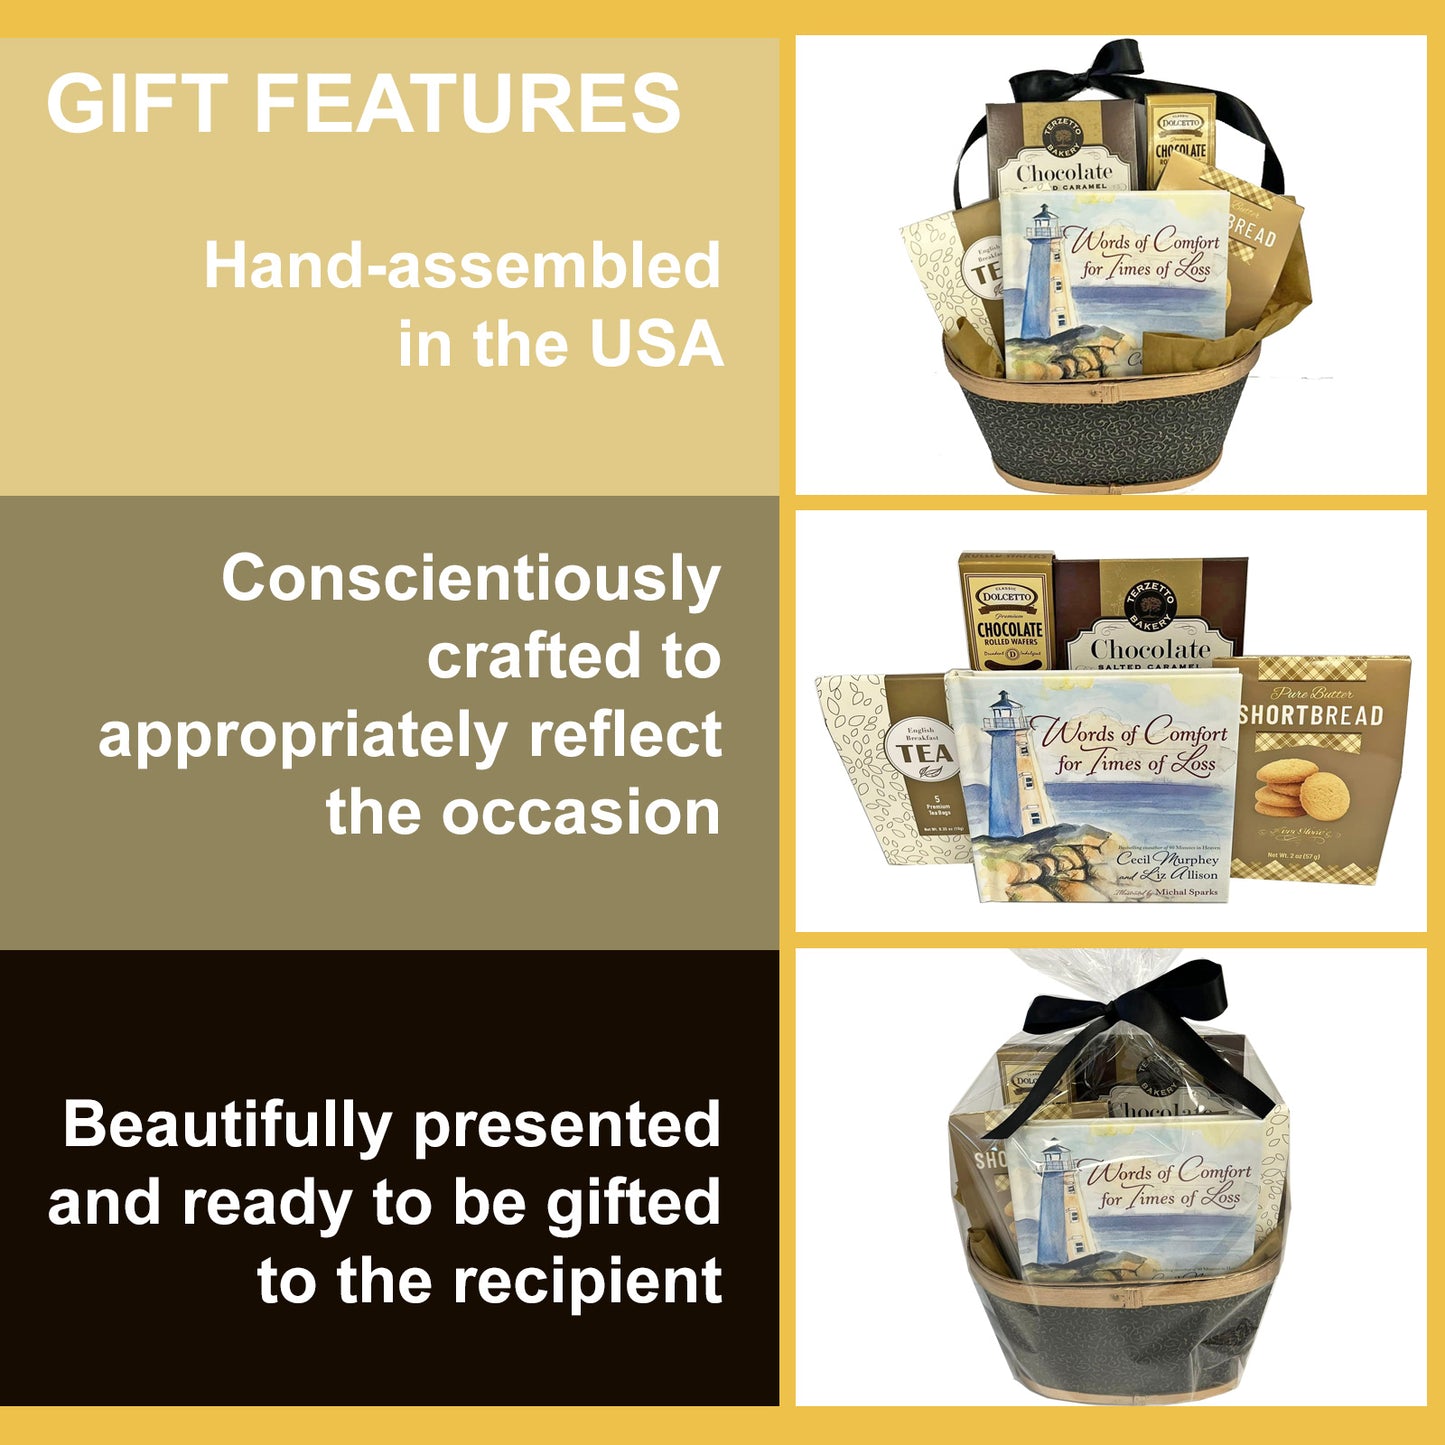 Words of Comfort Sympathy Gift with Book and Food